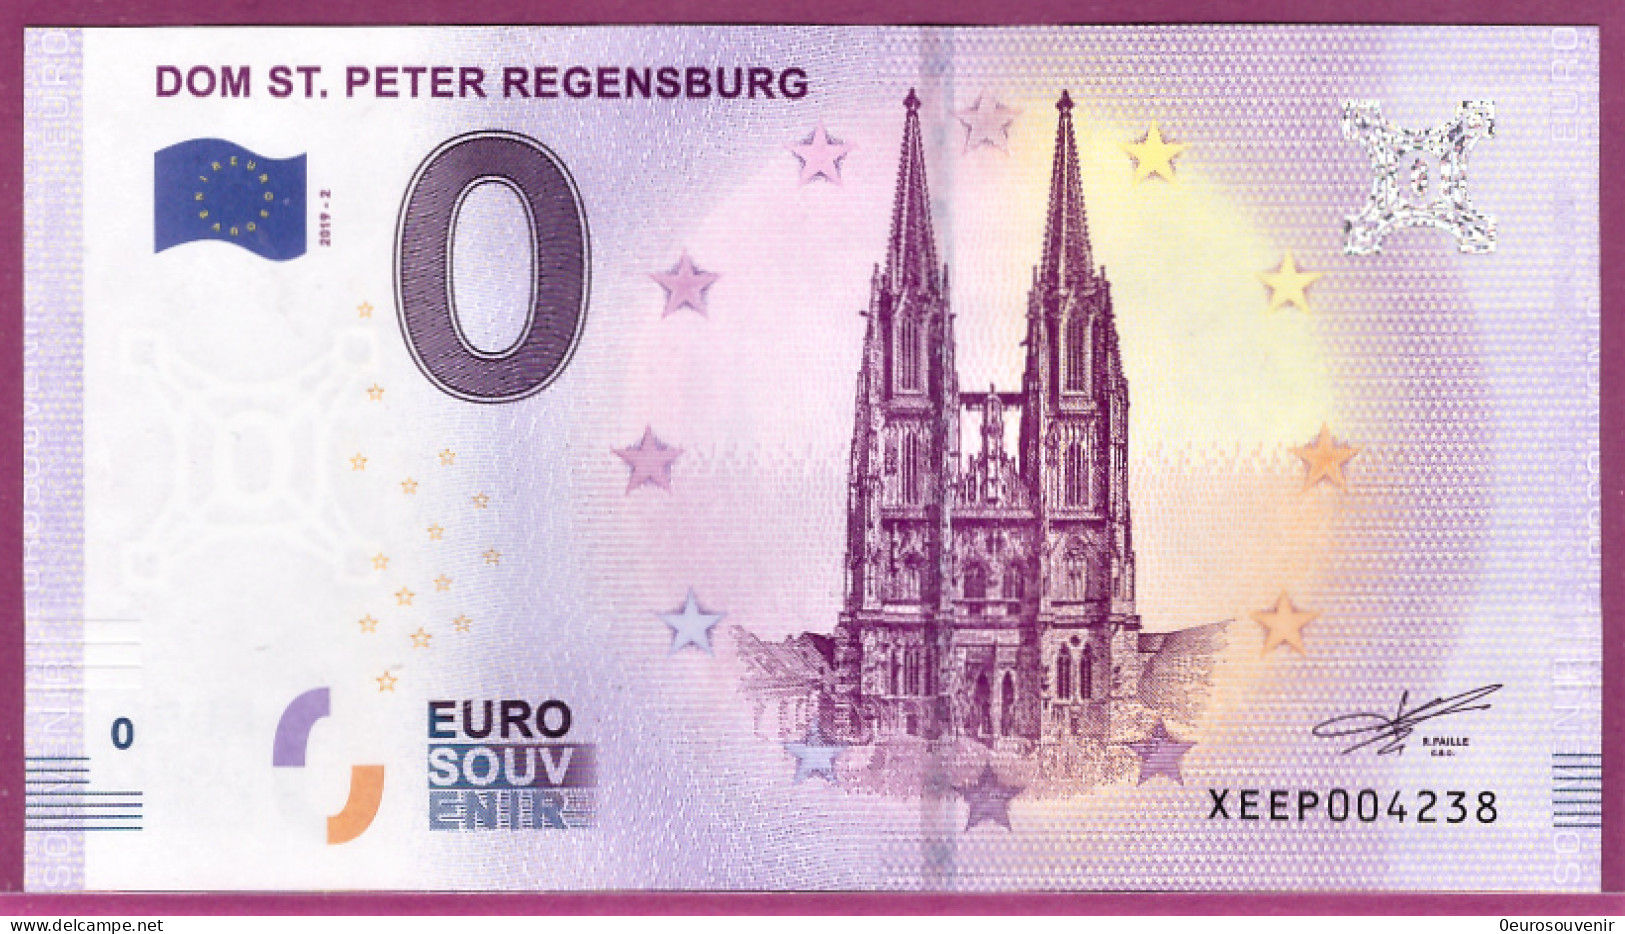 0-Euro XEEP 2019-2 DOM ST. PETER REGENSBURG - Private Proofs / Unofficial